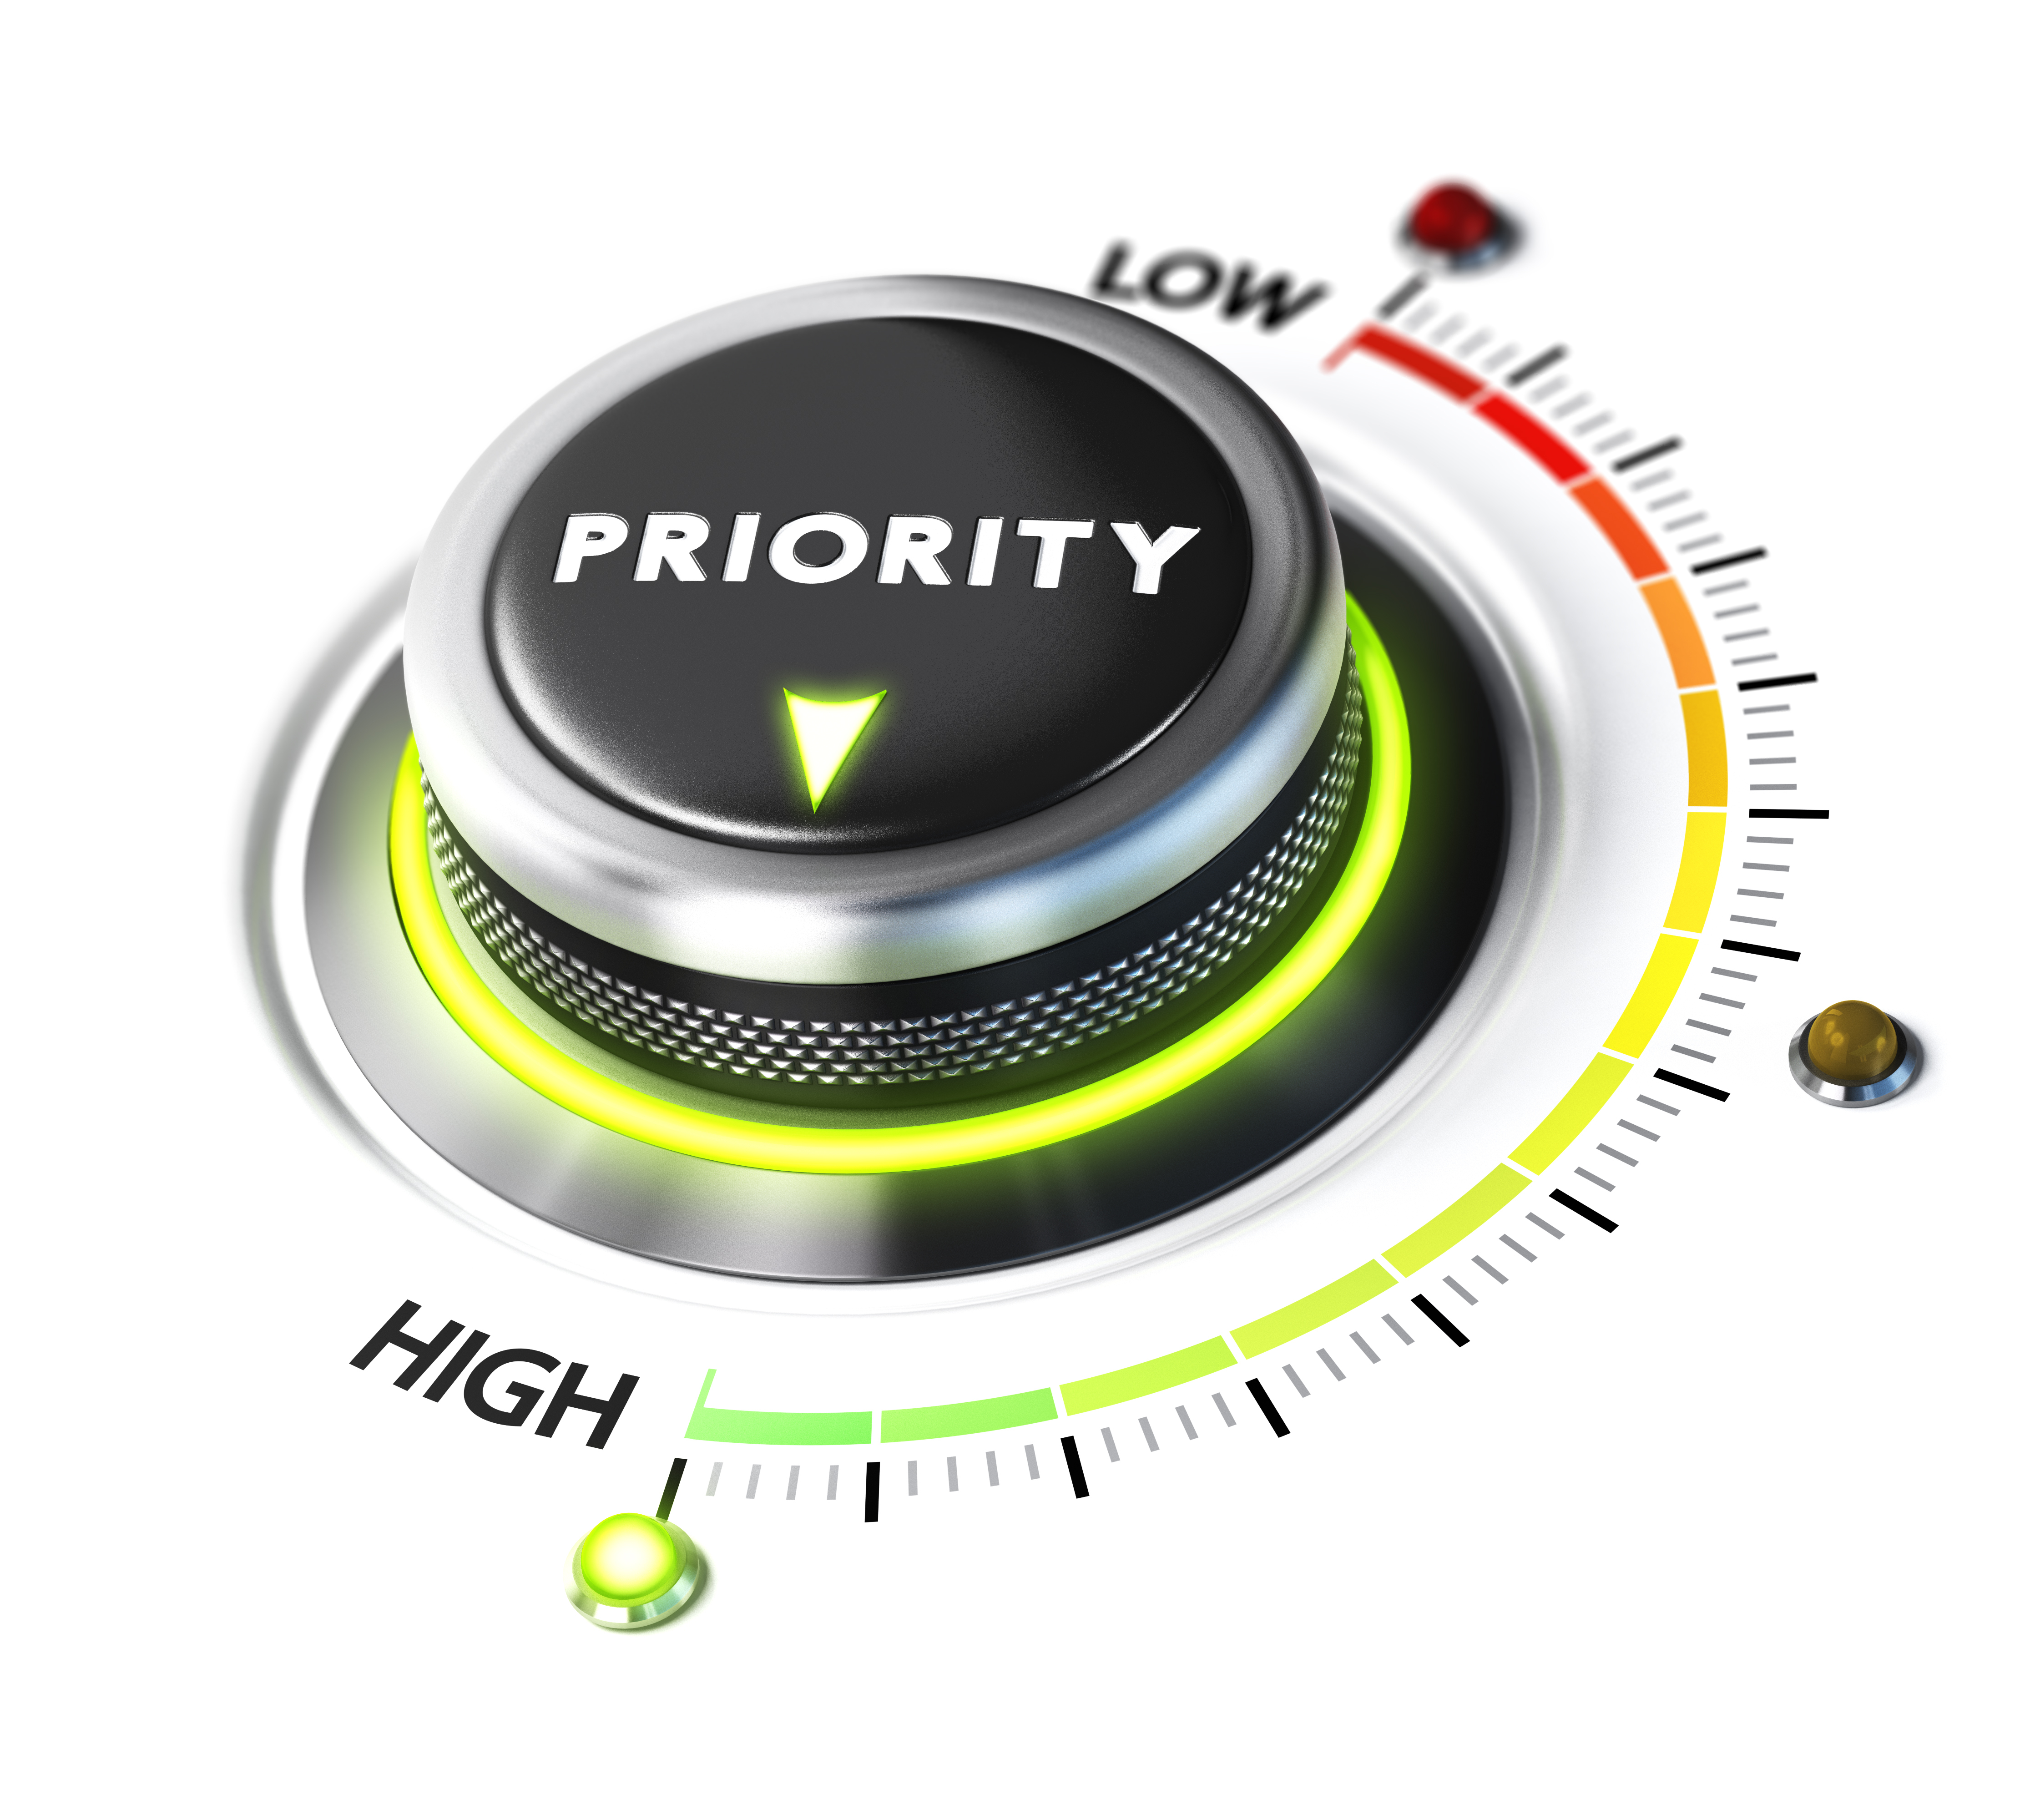 CEOs can benefit from analyzing and defining priorities